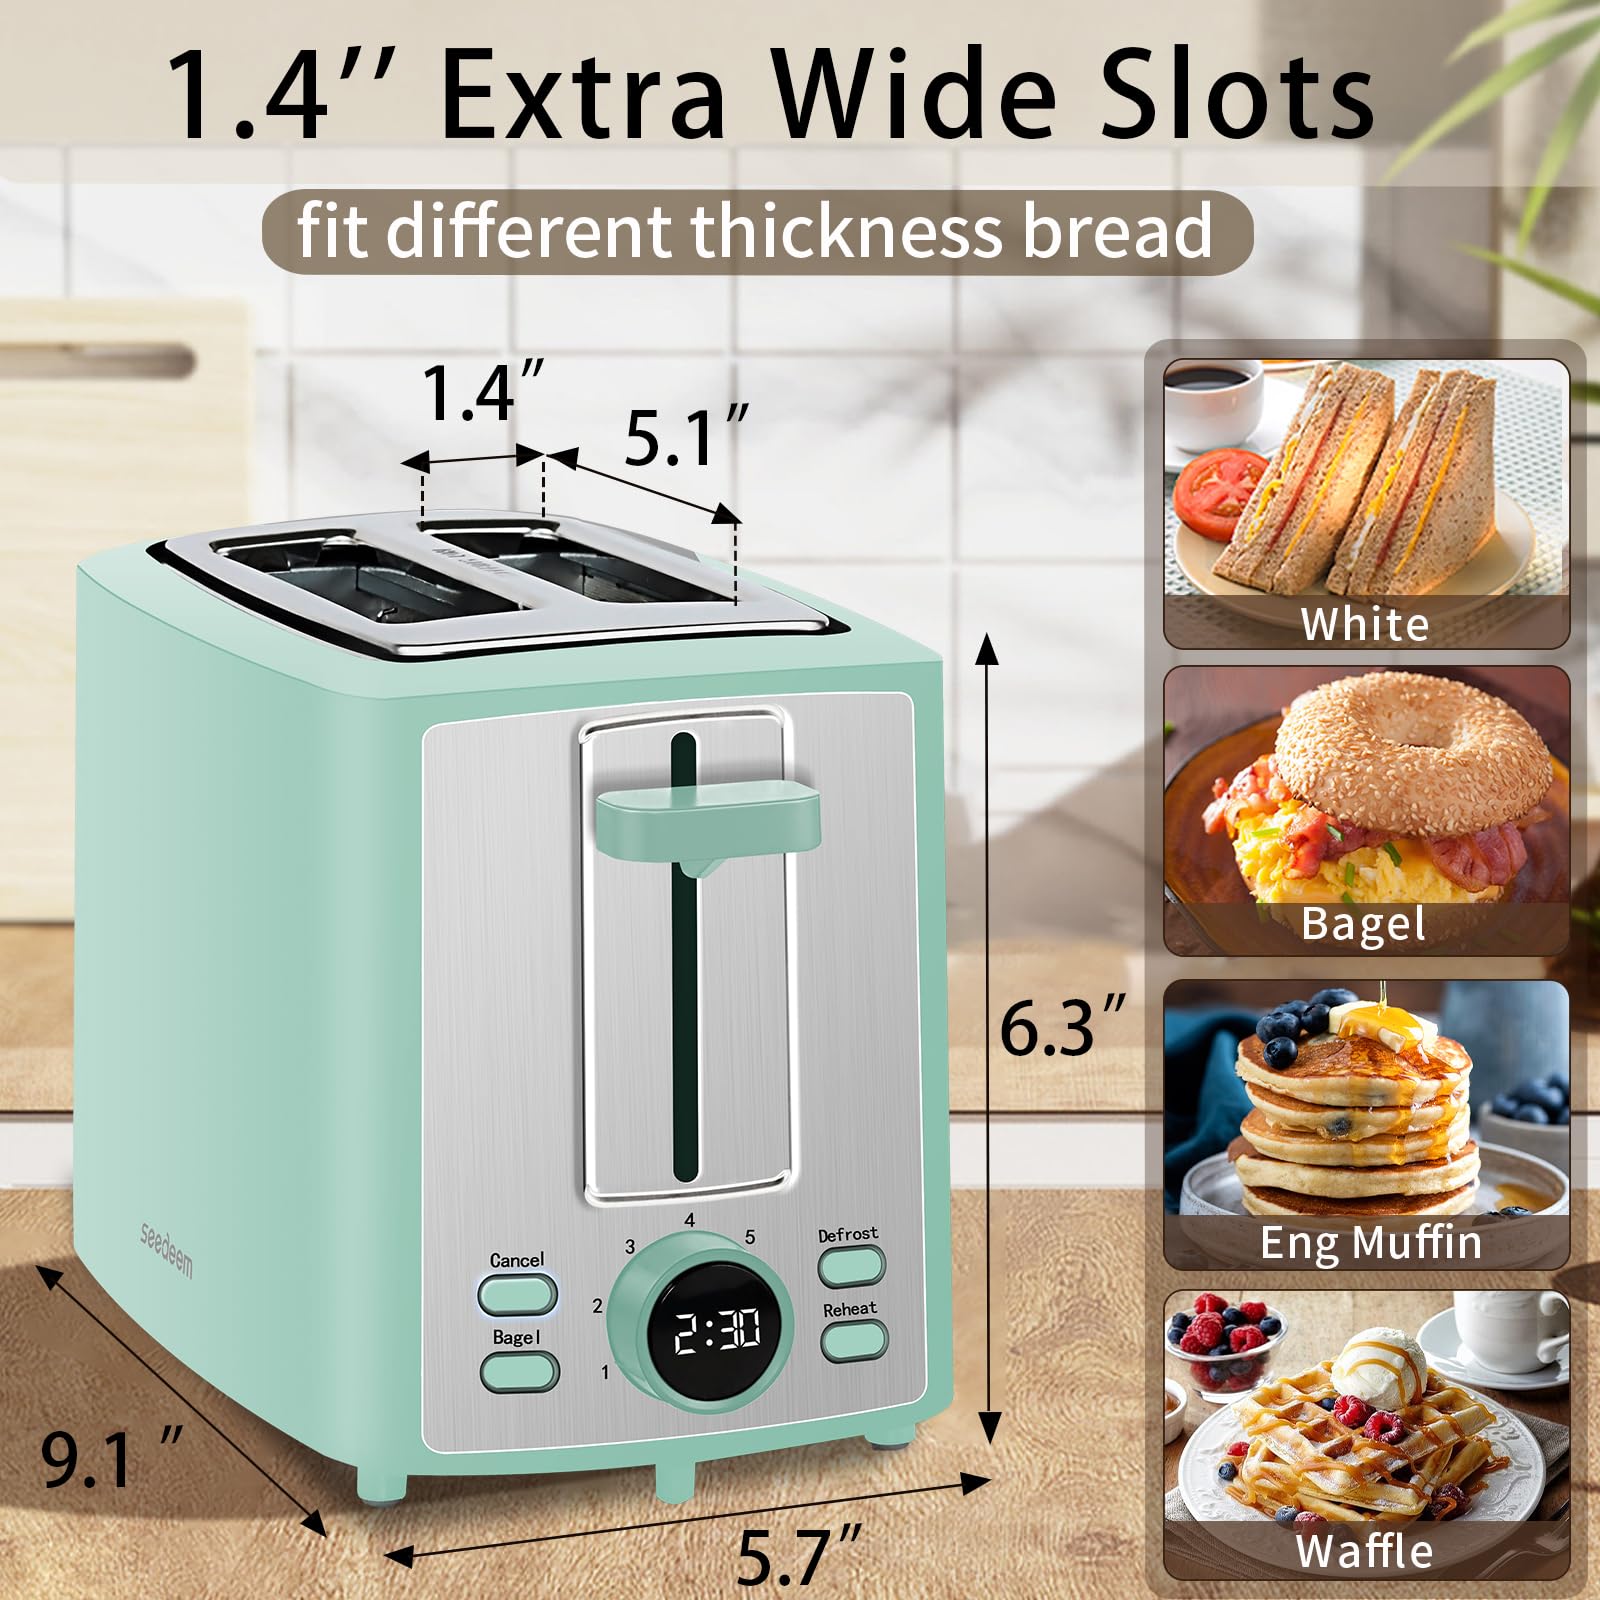 SEEDEEM Toaster 2 Slice, Bread Toaster with LCD Display, 7 Shade Settings, 1.４'' Variable Extra Wide Slots Toaster with Cancel, Bagel, Defrost, Reheat Functions, Removable Crumb Tray, 900W, Azure Blue